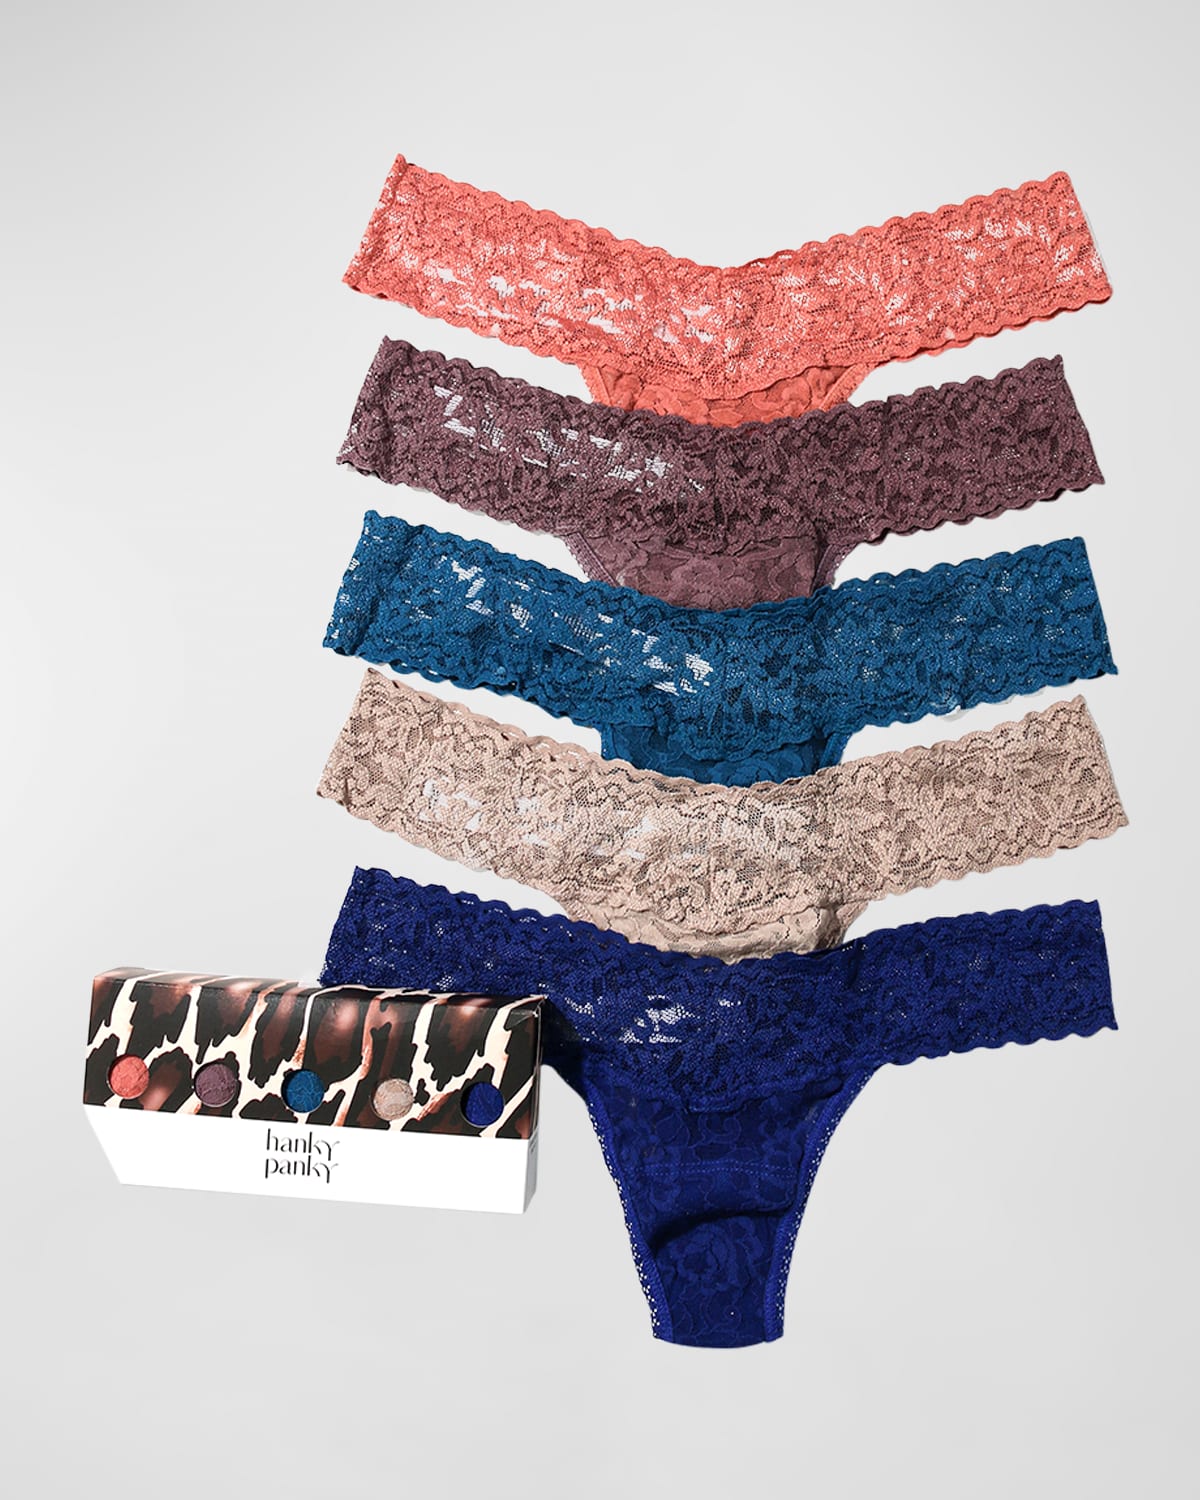 Hanky Panky 5 Pack Signature Lace Low Rise Thongs in Printed Box